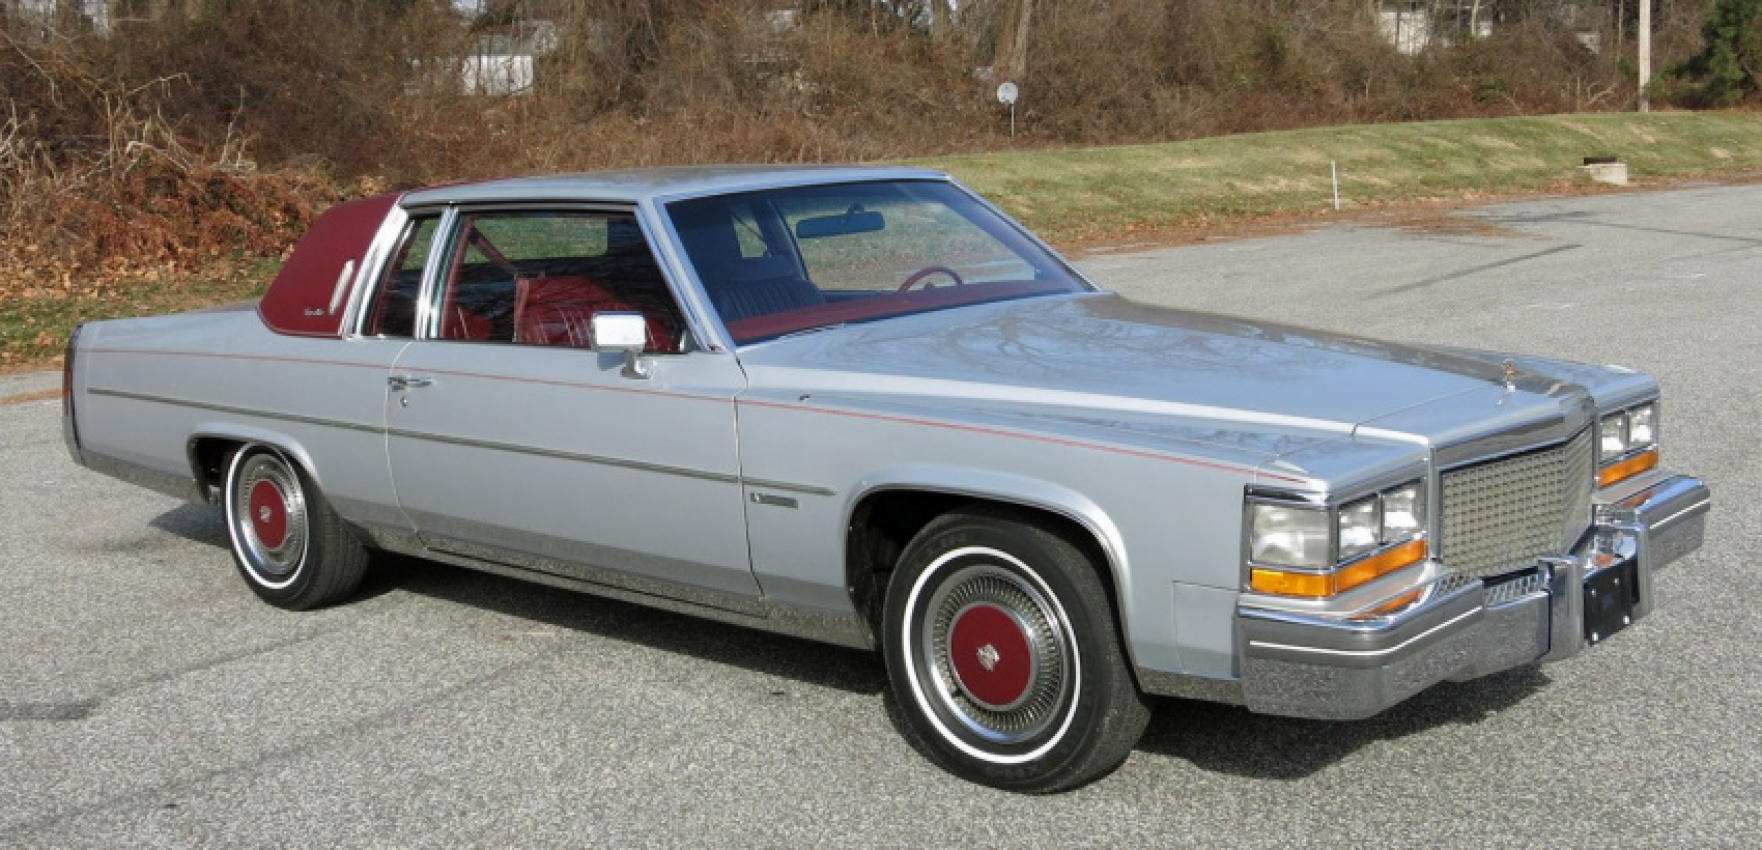 autos, cadillac, cars, classic cars, 1980s, year in review, deville cadillac history 1981